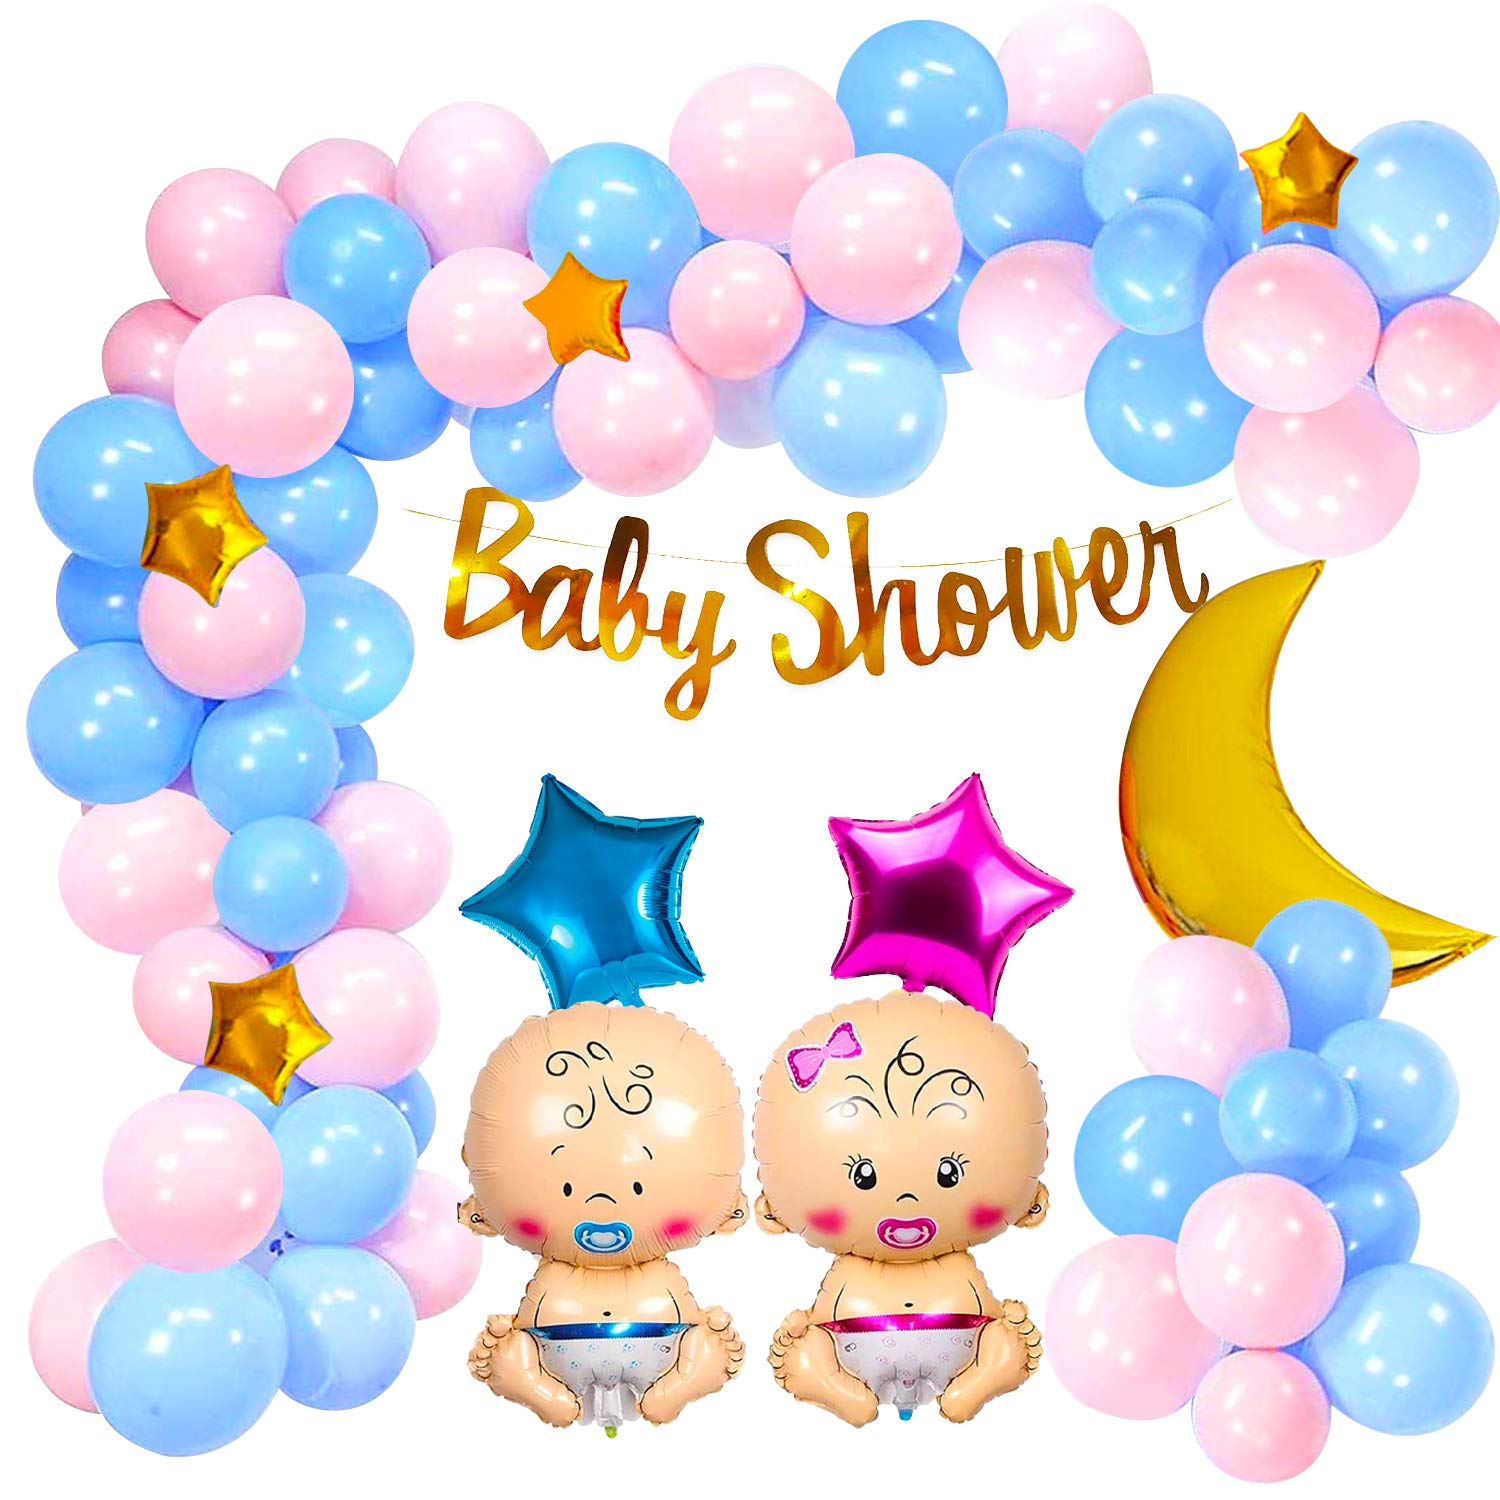 Baby Shower Combo Decorations Material Set-50Pcs Baby Shower Banner, Latex Balloon,Star Foil Balloon,Blue and Pink baby For Gender Reveal, Maternity, Pregnancy Photoshoot Material Items Supplies